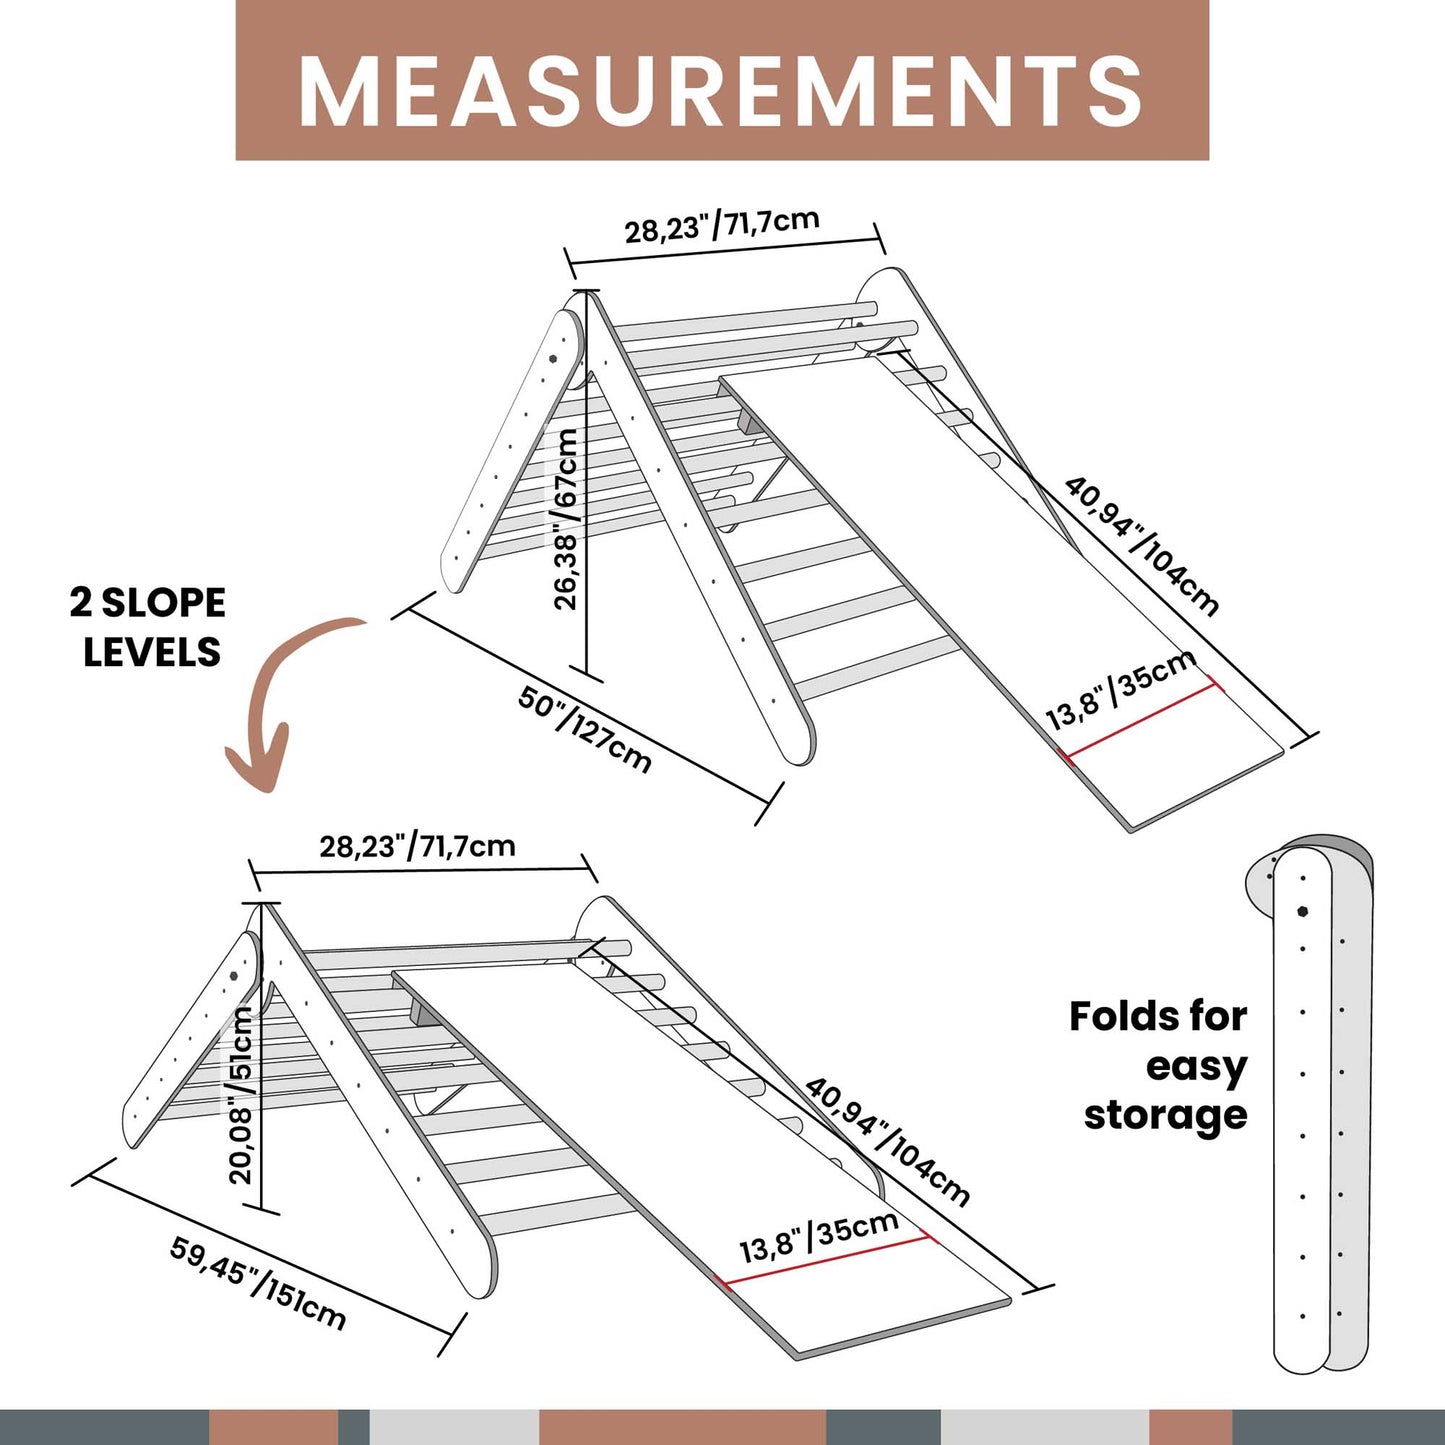 A diagram showing the measurements of a Climbing arch + Foldable climbing triangle + a ramp in a child's room.